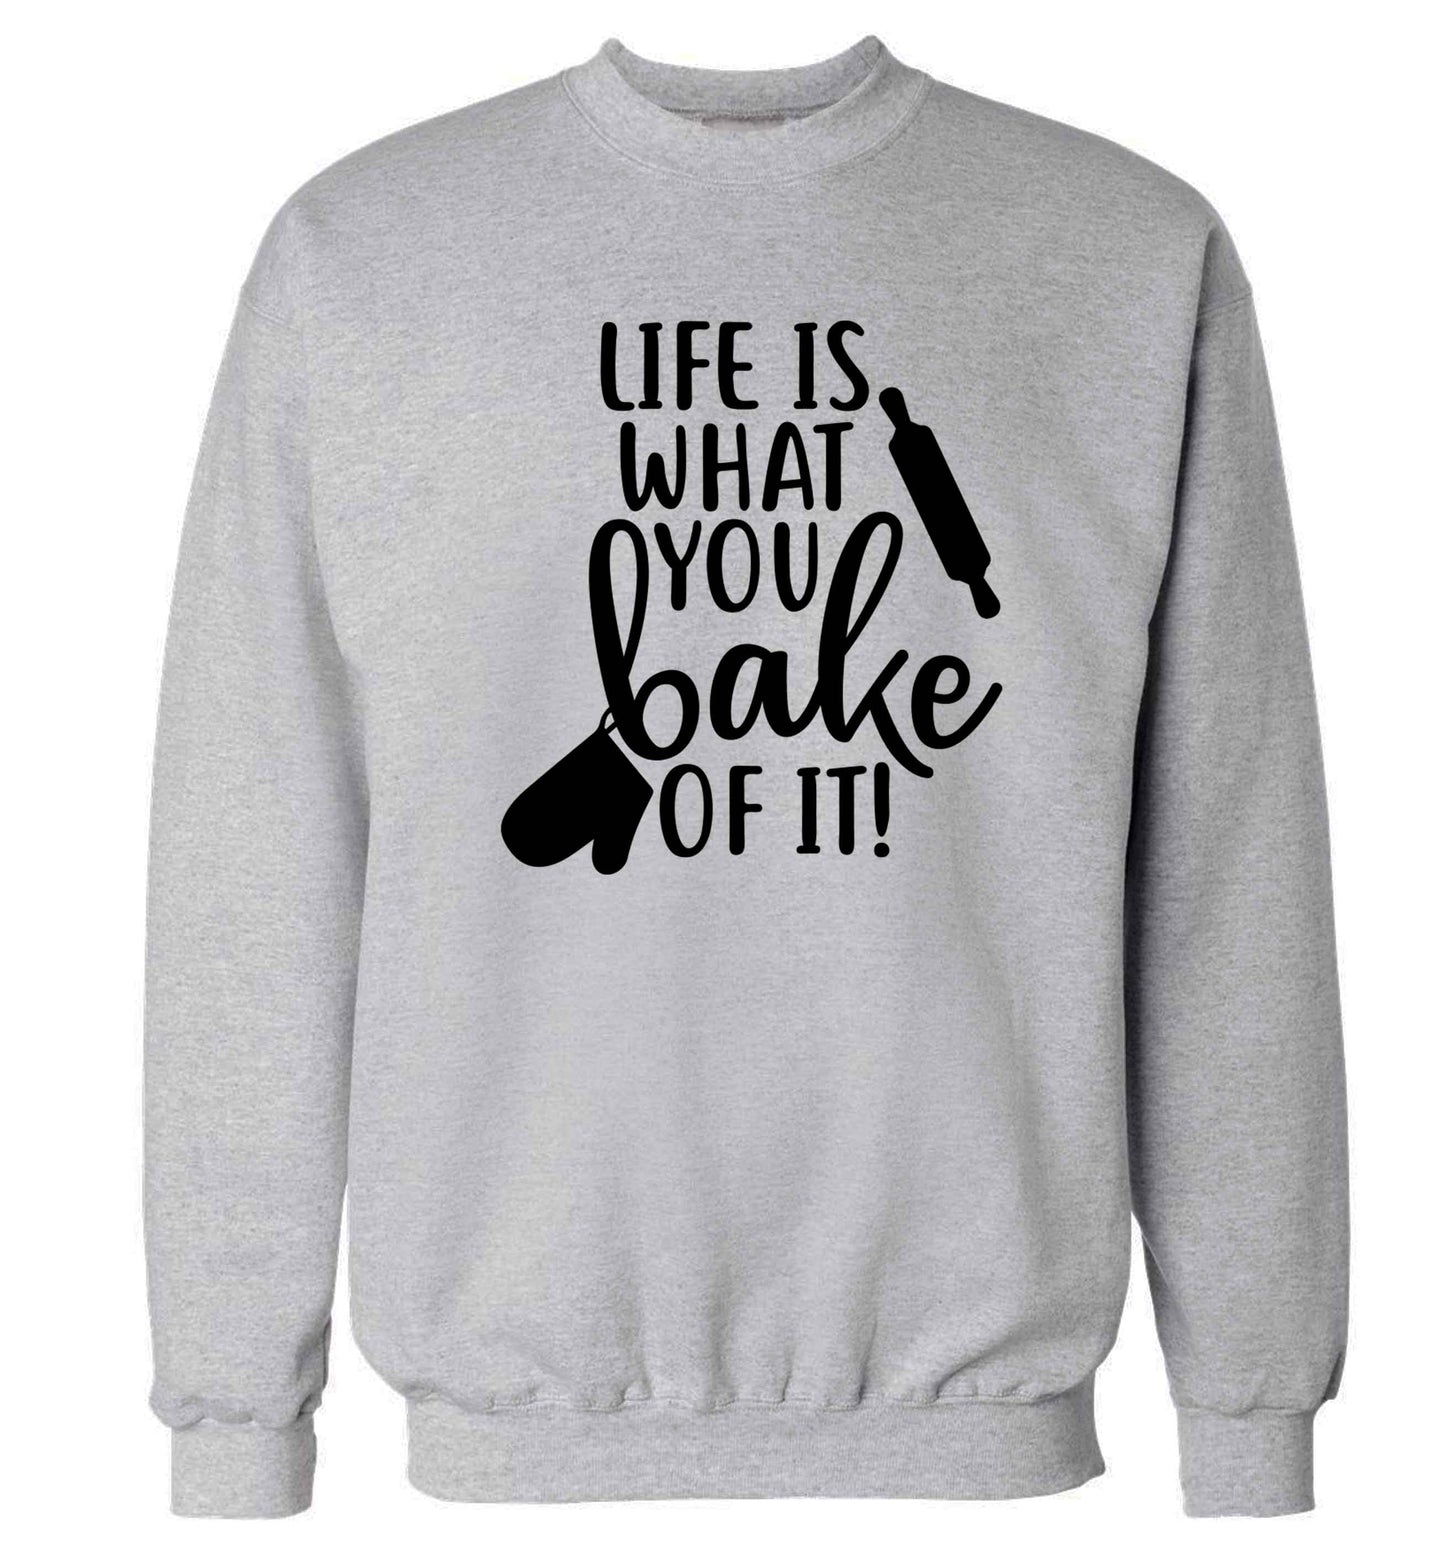 Life is what you bake of it Adult's unisex grey Sweater 2XL